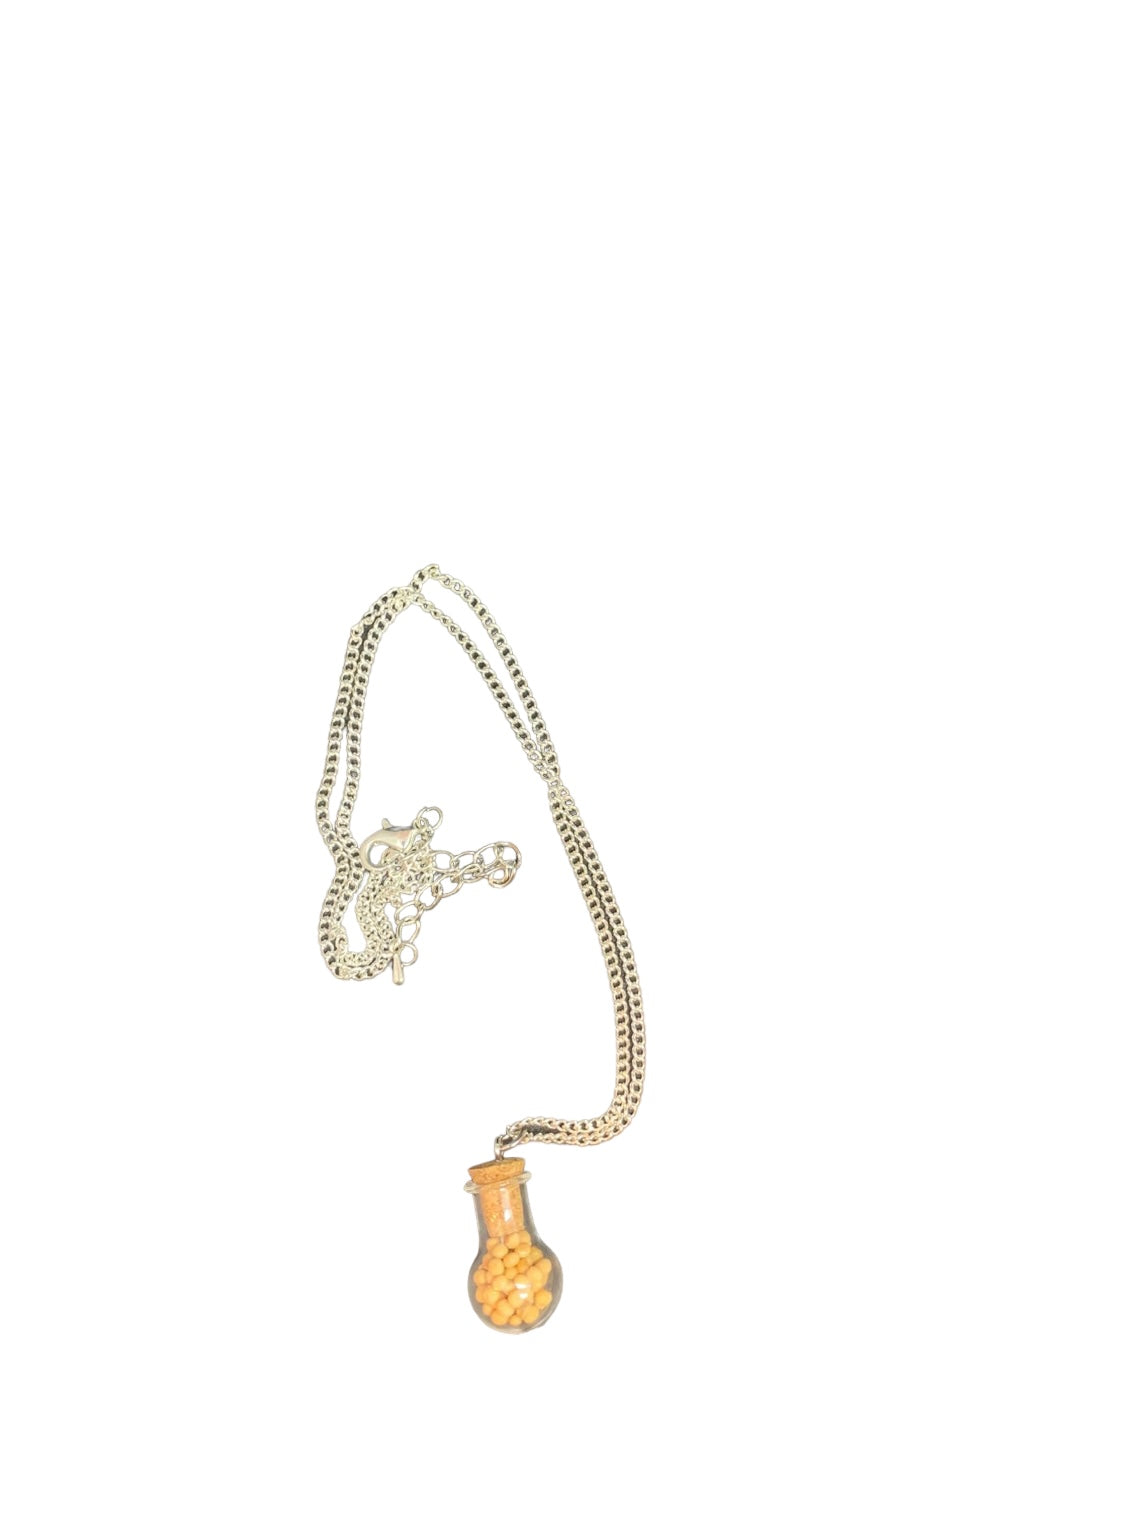 MUSTARD SEED NECKLACE